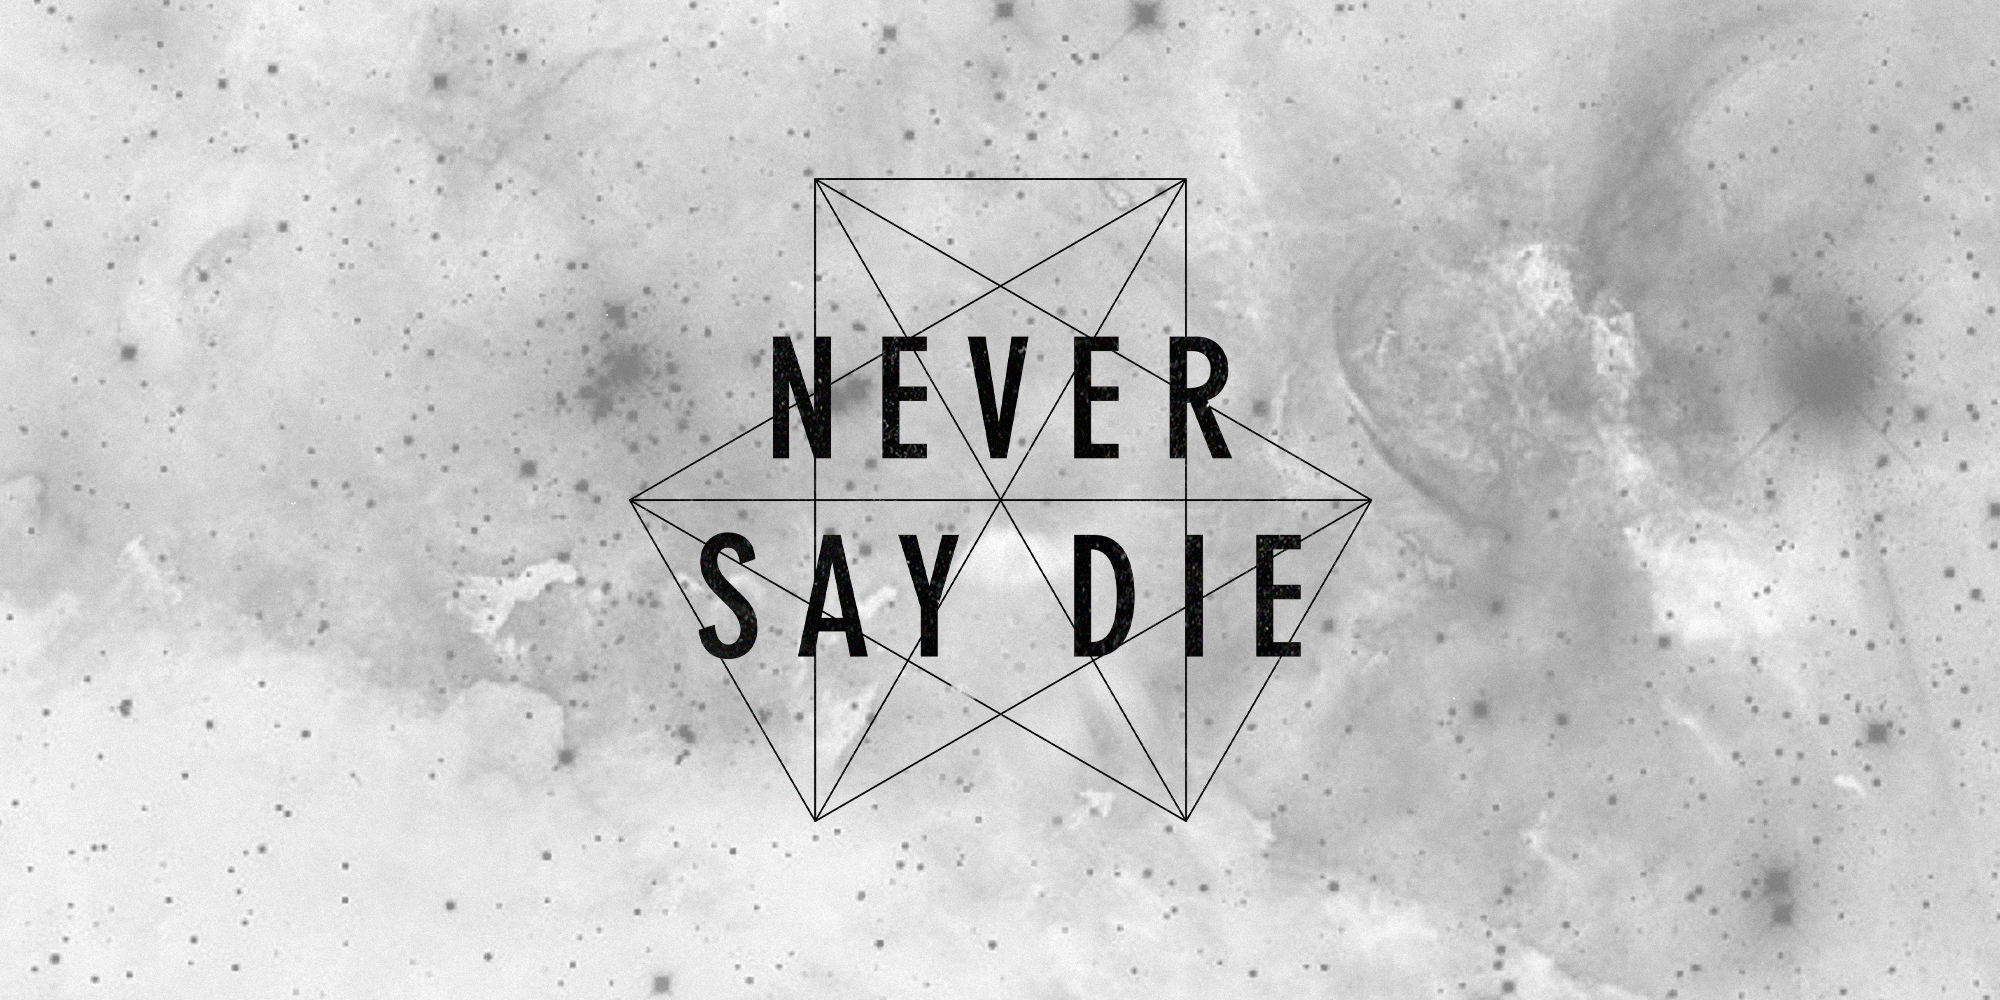 Have a never be the say. Never say die. Never say die records. Never say die logo. Never say die Black.